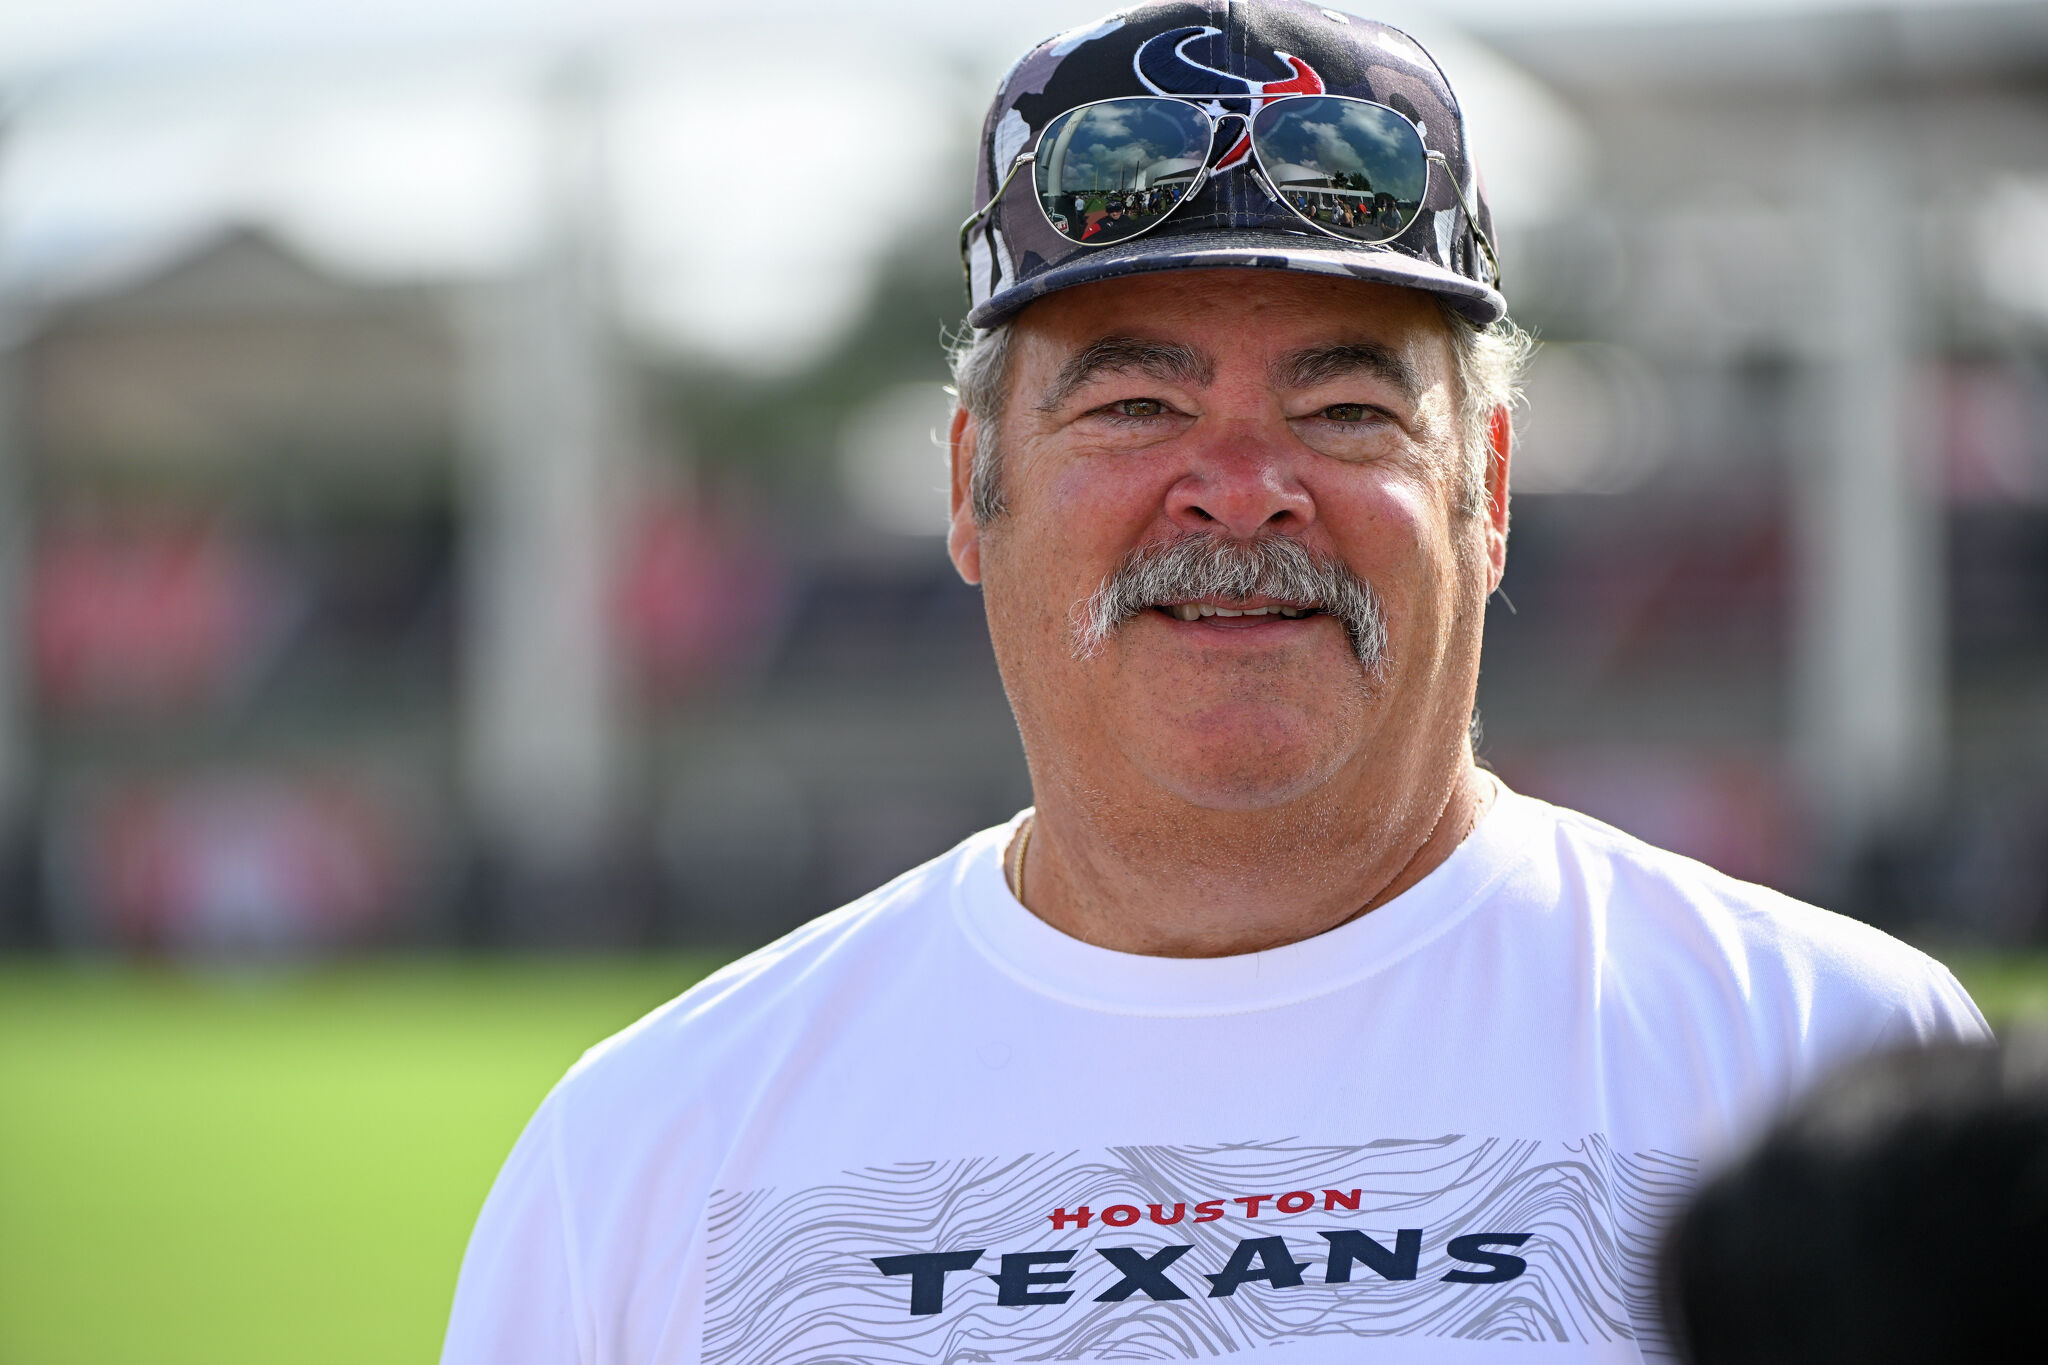 Texans owner drops hint about new uniforms in Reddit AMA